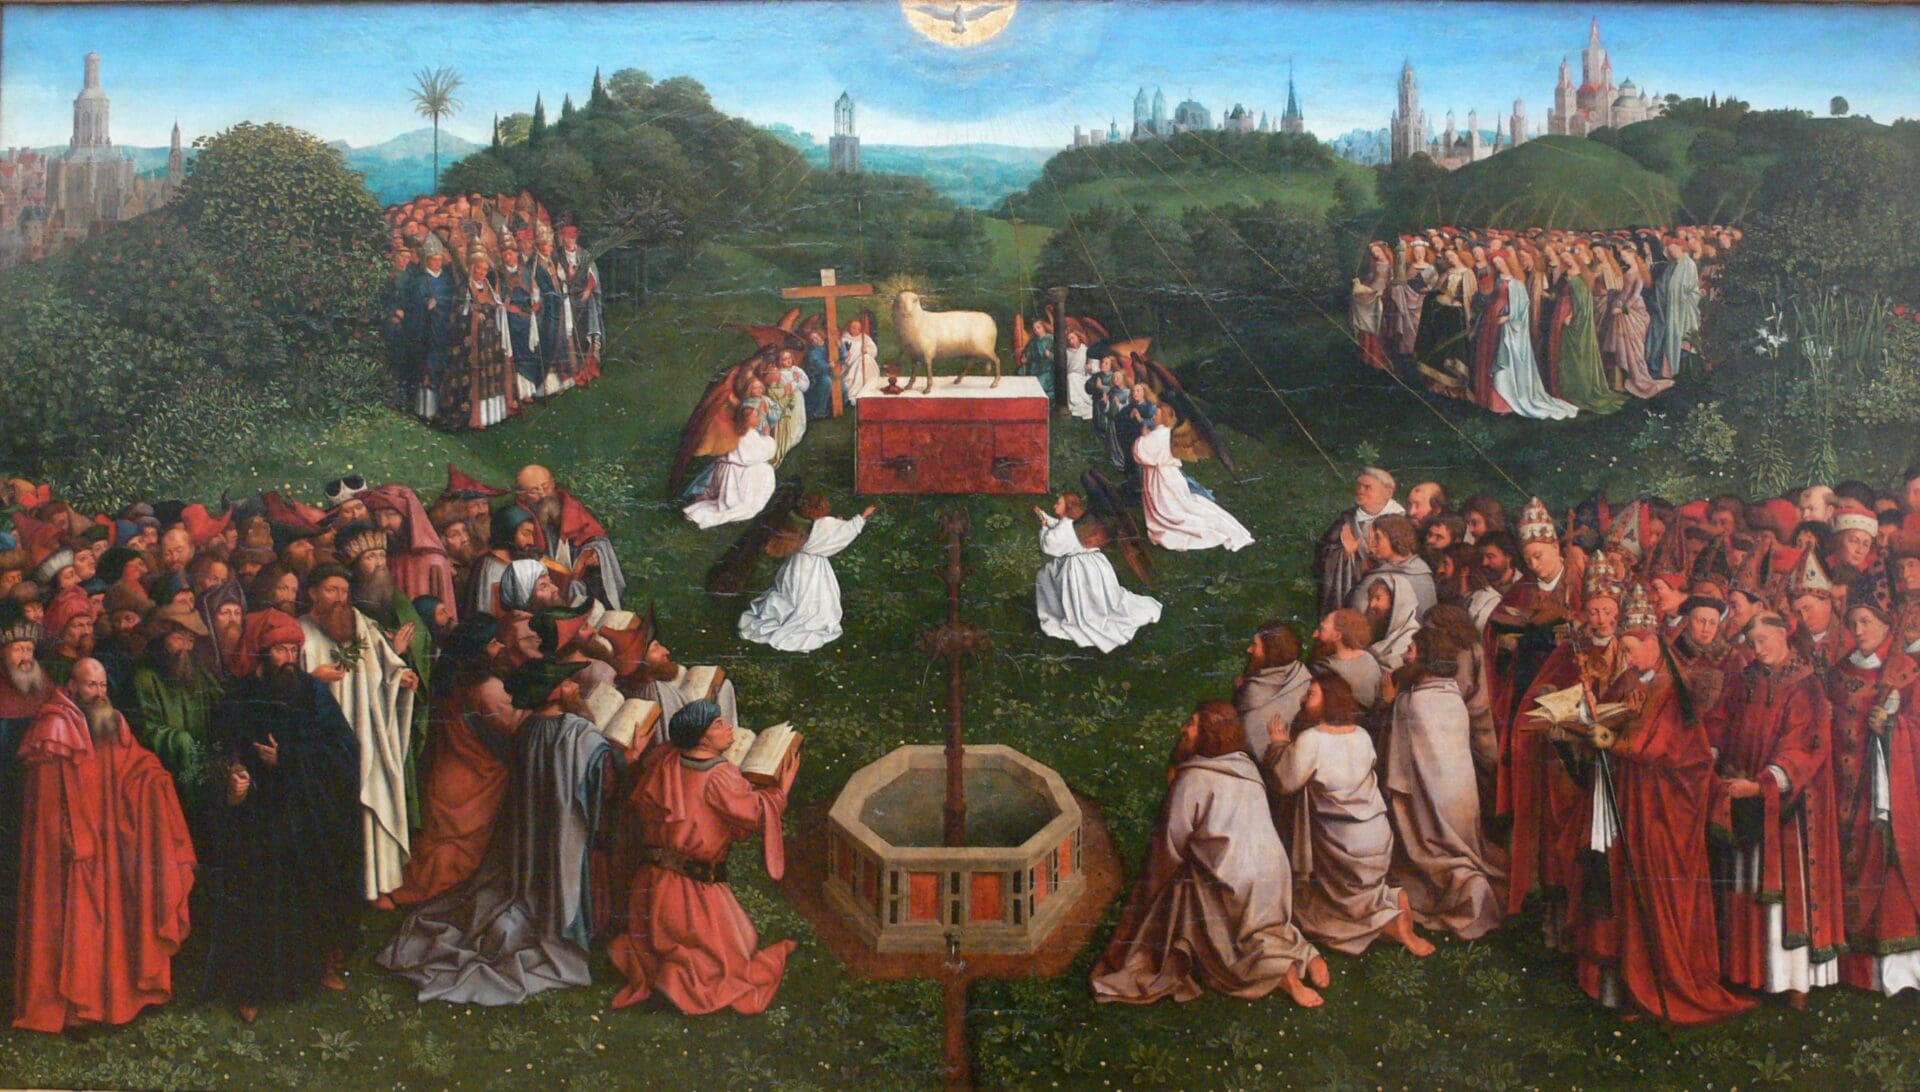 Creation, Grace, and the Liturgy